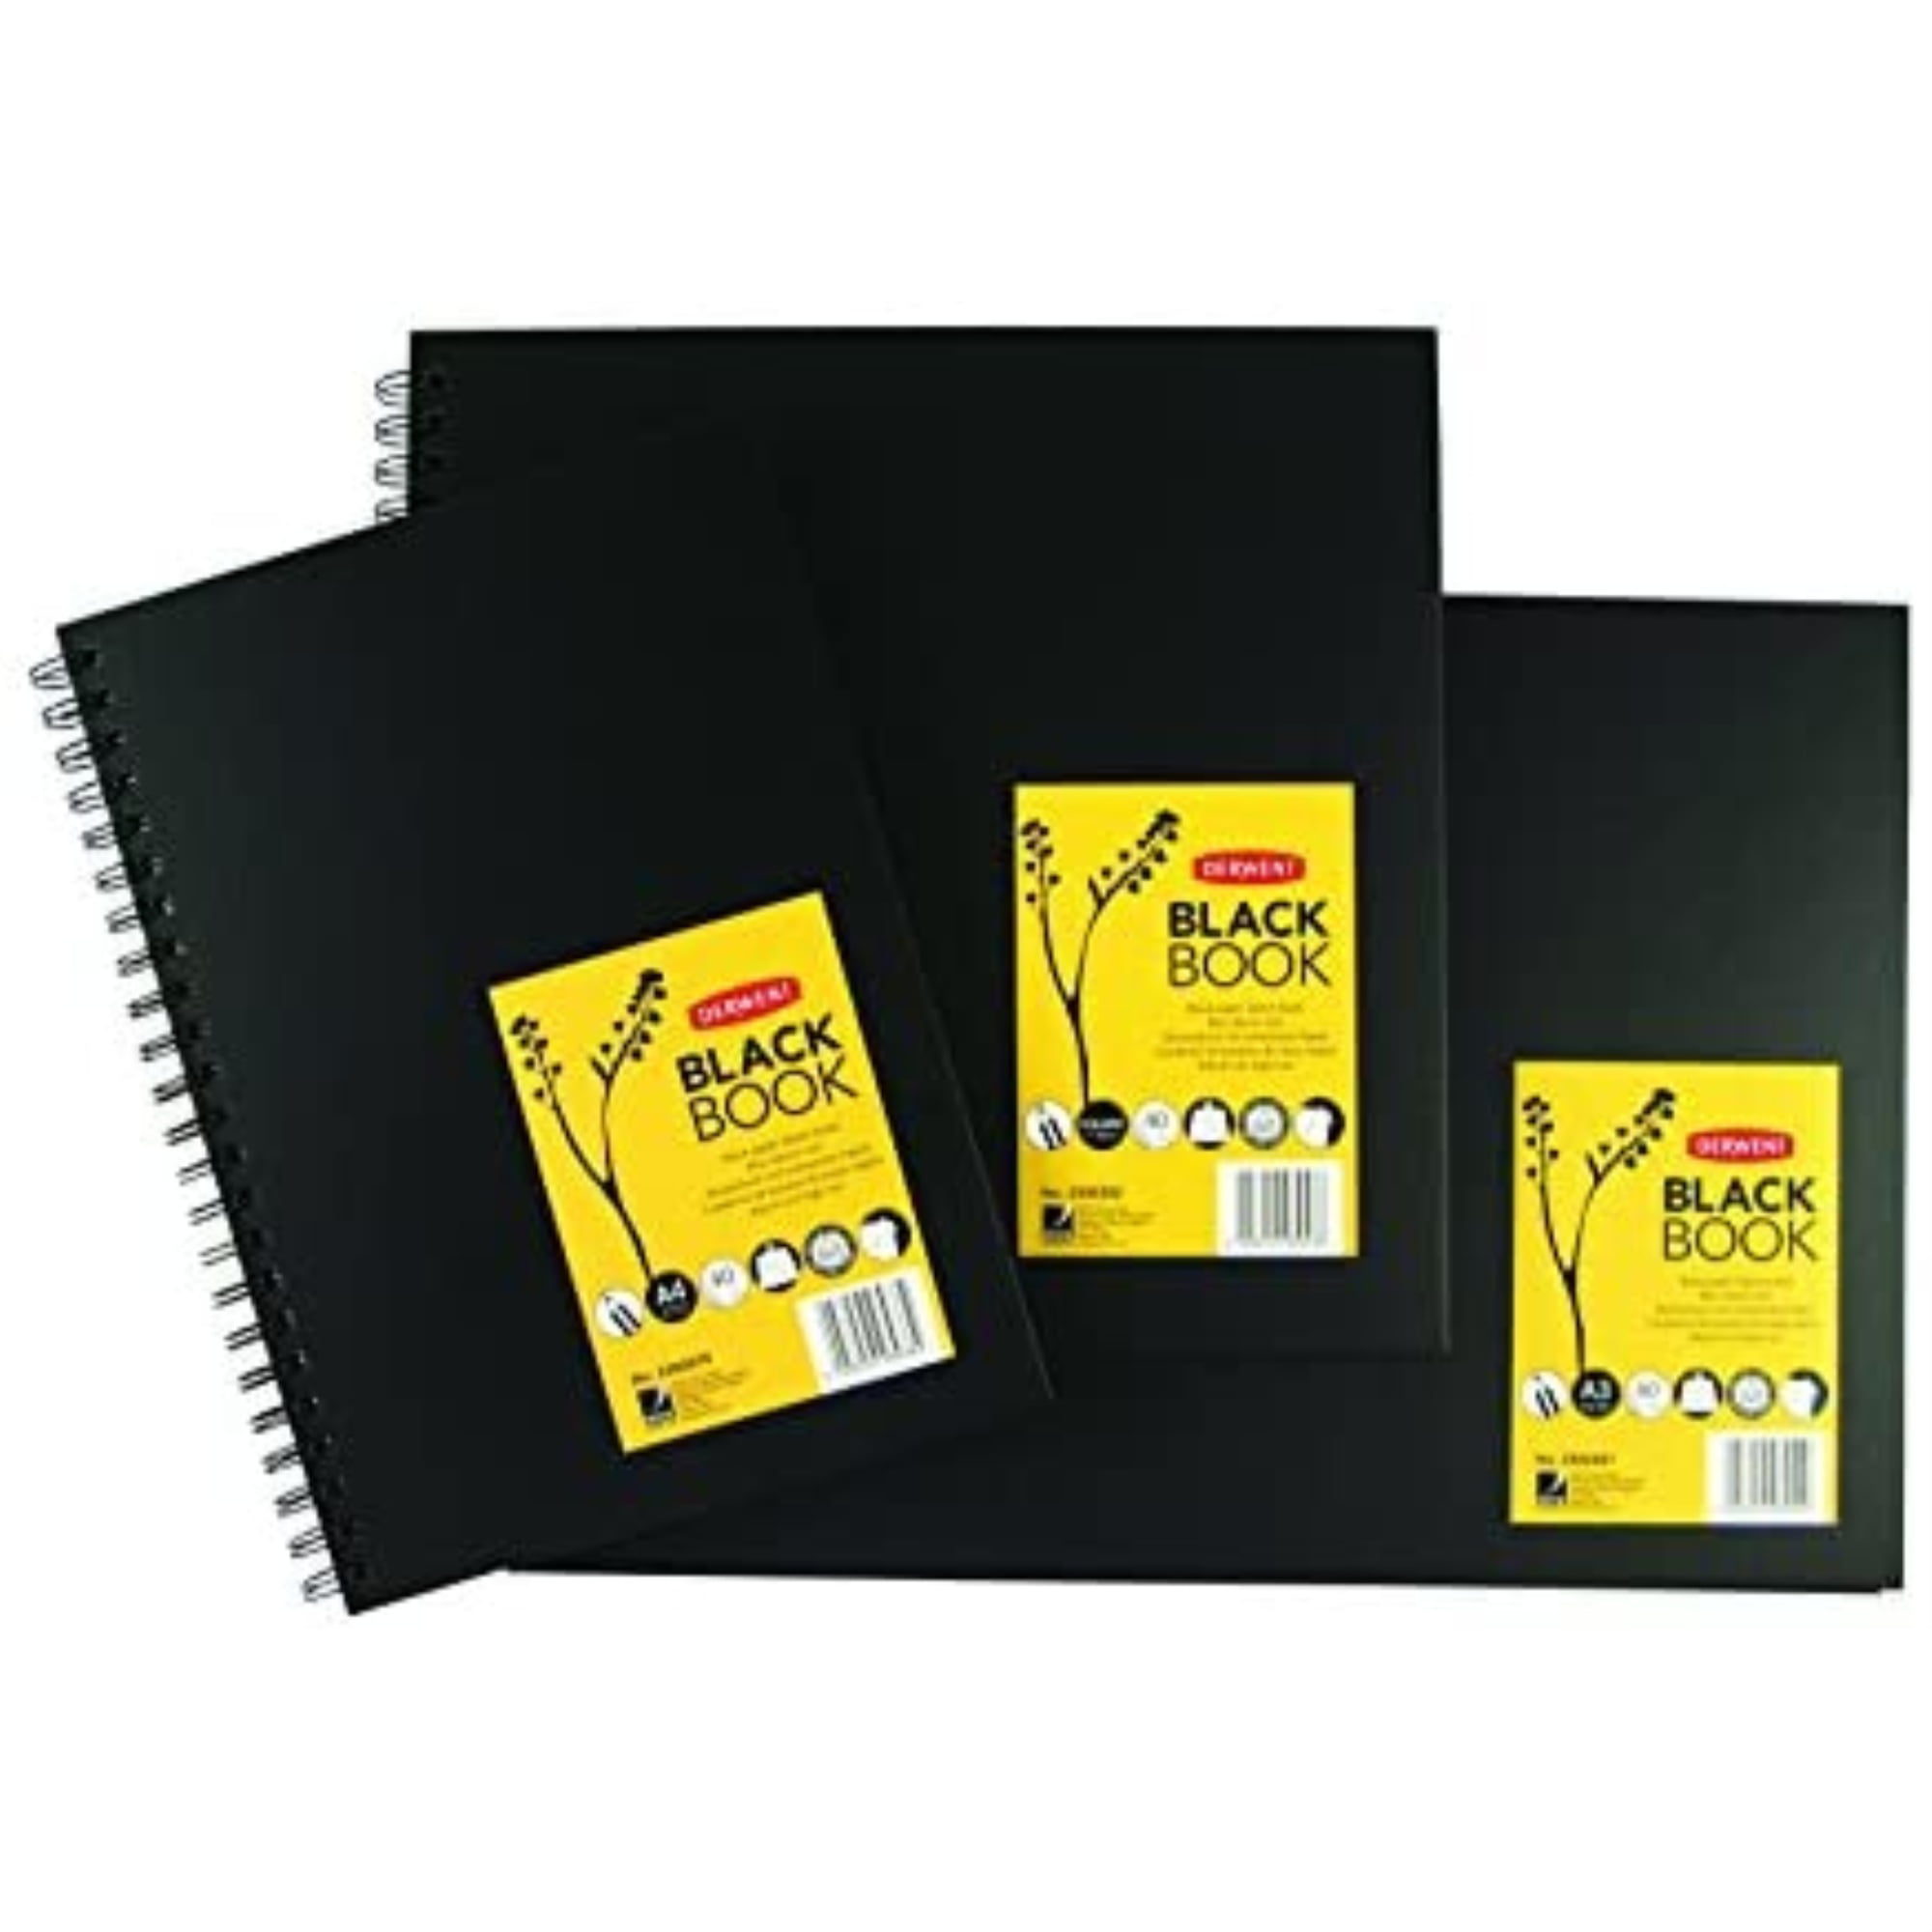  Derwent Black Paper Sketch Book - A4 Portrait, 40 Sheets,  Acid-Free Paper, Wirebound Spine, Professional Quality, Black Book, 2300379  : Drawing Pads And Books : Office Products